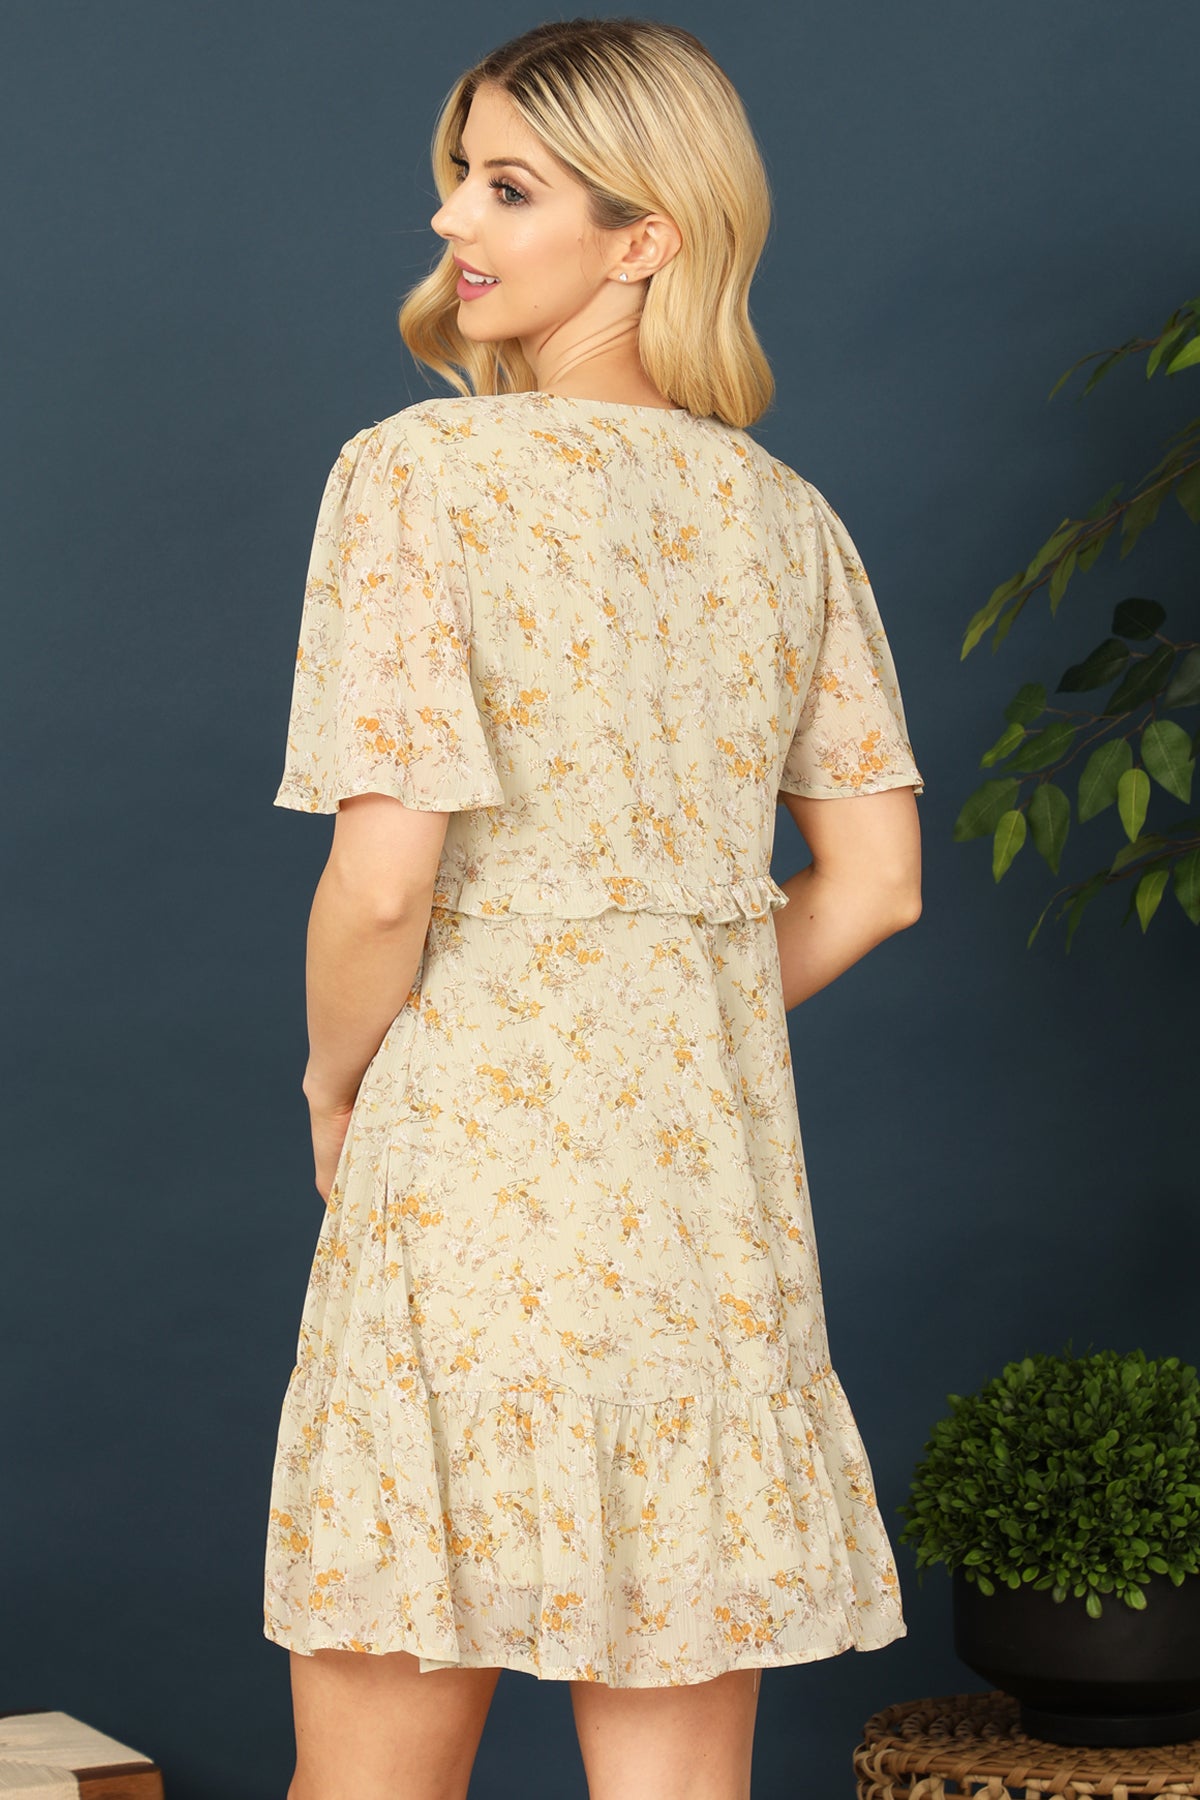 V-NECK BELL SLEEVE RUFFLE DETAIL FLORAL DRESS 2-2-2 (NOW $6.75 ONLY!)